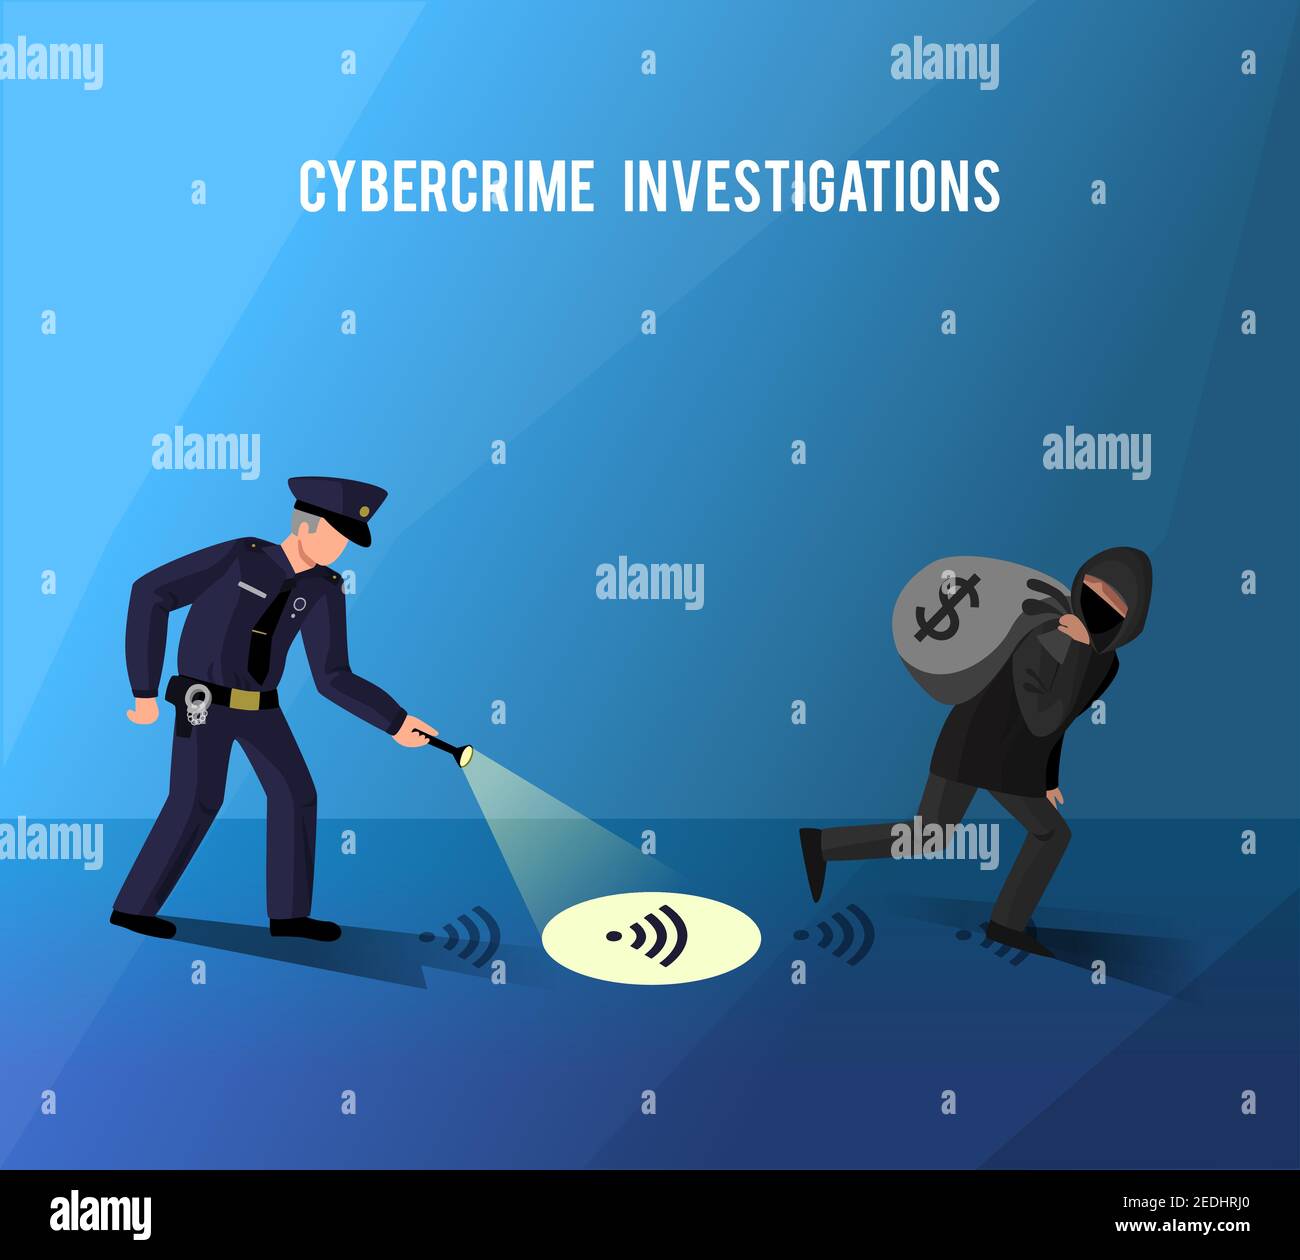 Computer internet hightech crime investigation cyber attacks and misuse of data prevention flat dark blue poster vector illustration Stock Vector